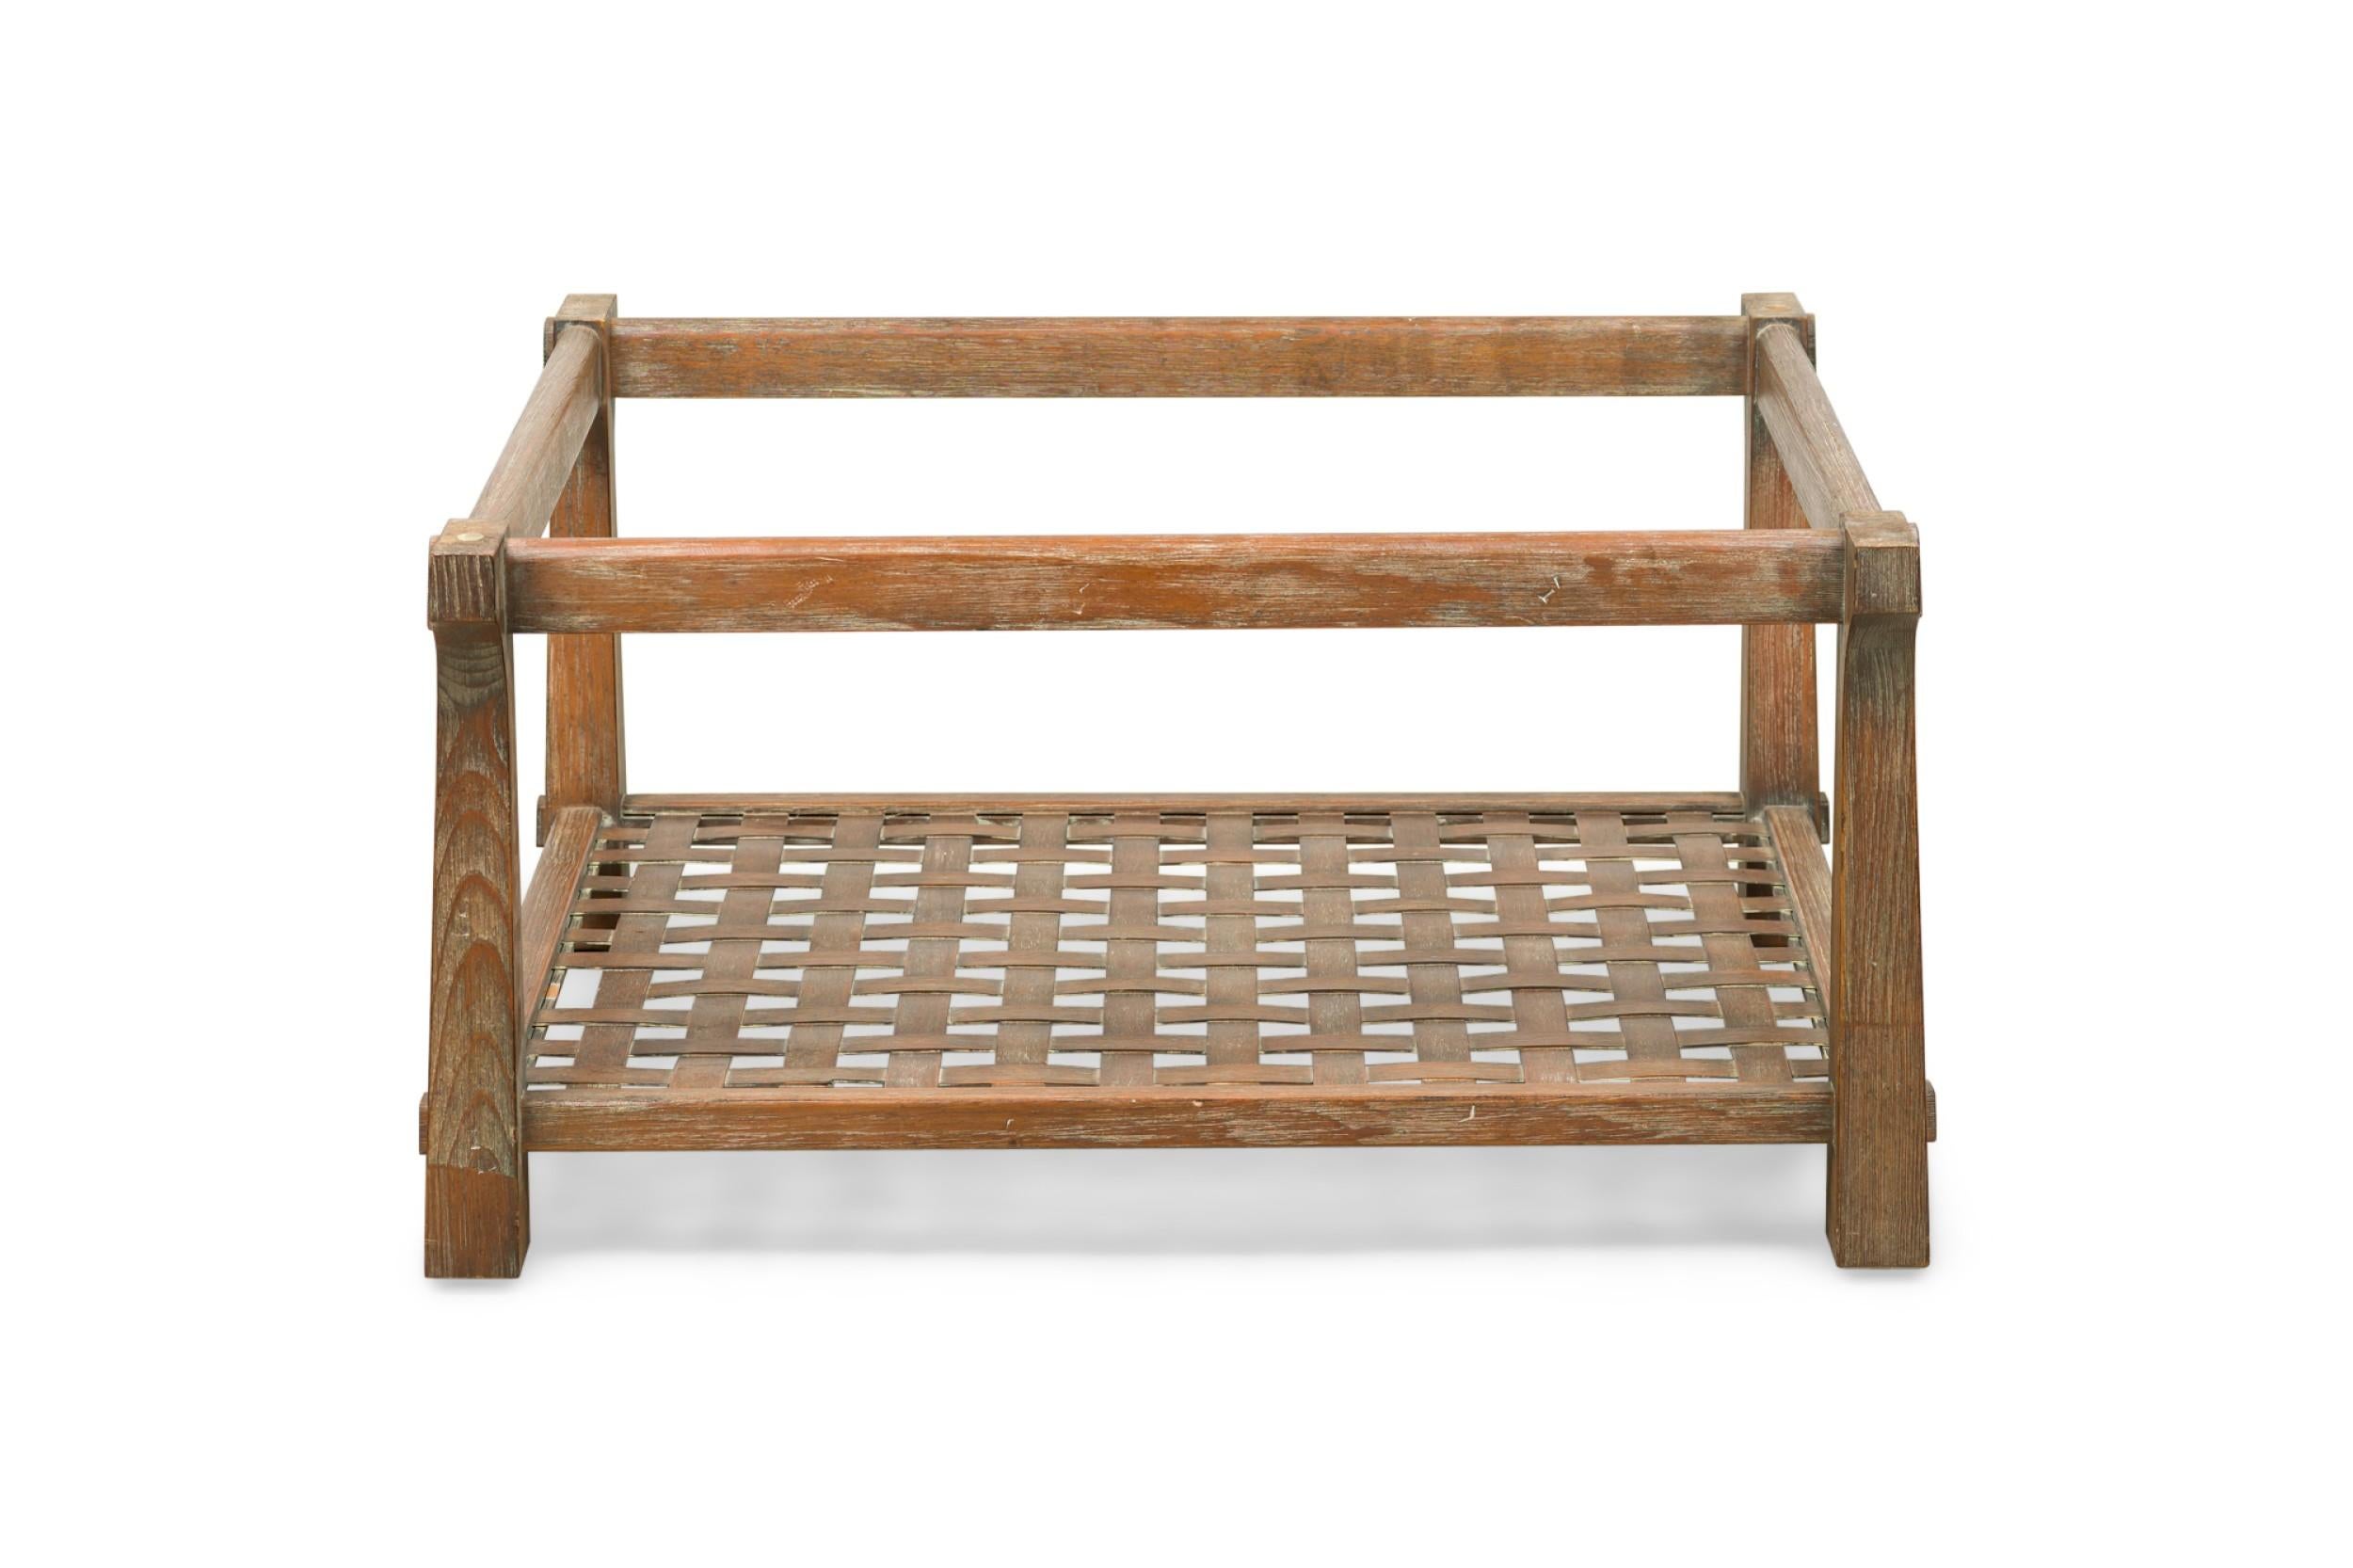 Modern Jamie Herzlinger American Cerused Wood and Caned Low Coffee Table Frame For Sale